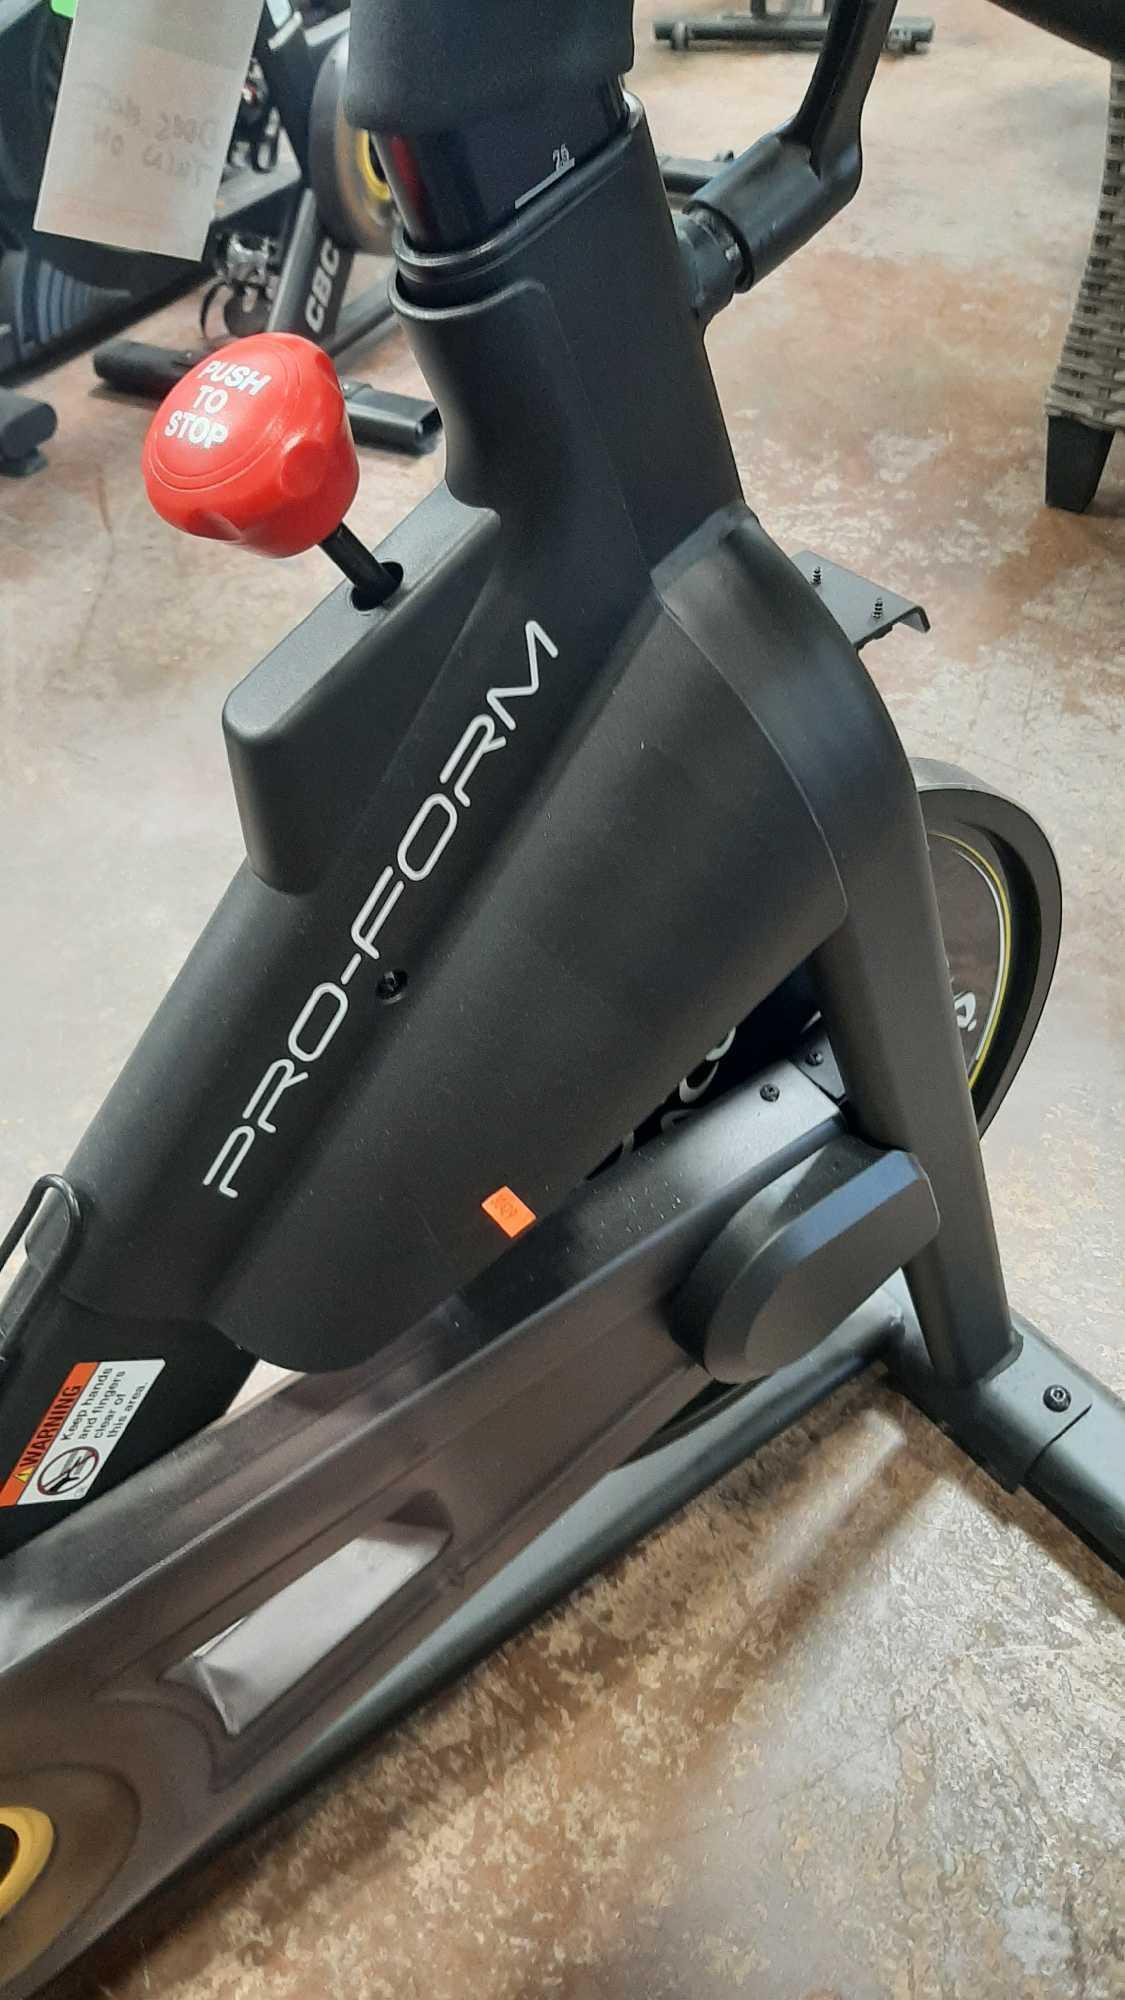 Proform Tour De France CBC Exercise Spin Bike with Tablet Holder*DOES NOT TURN ON*